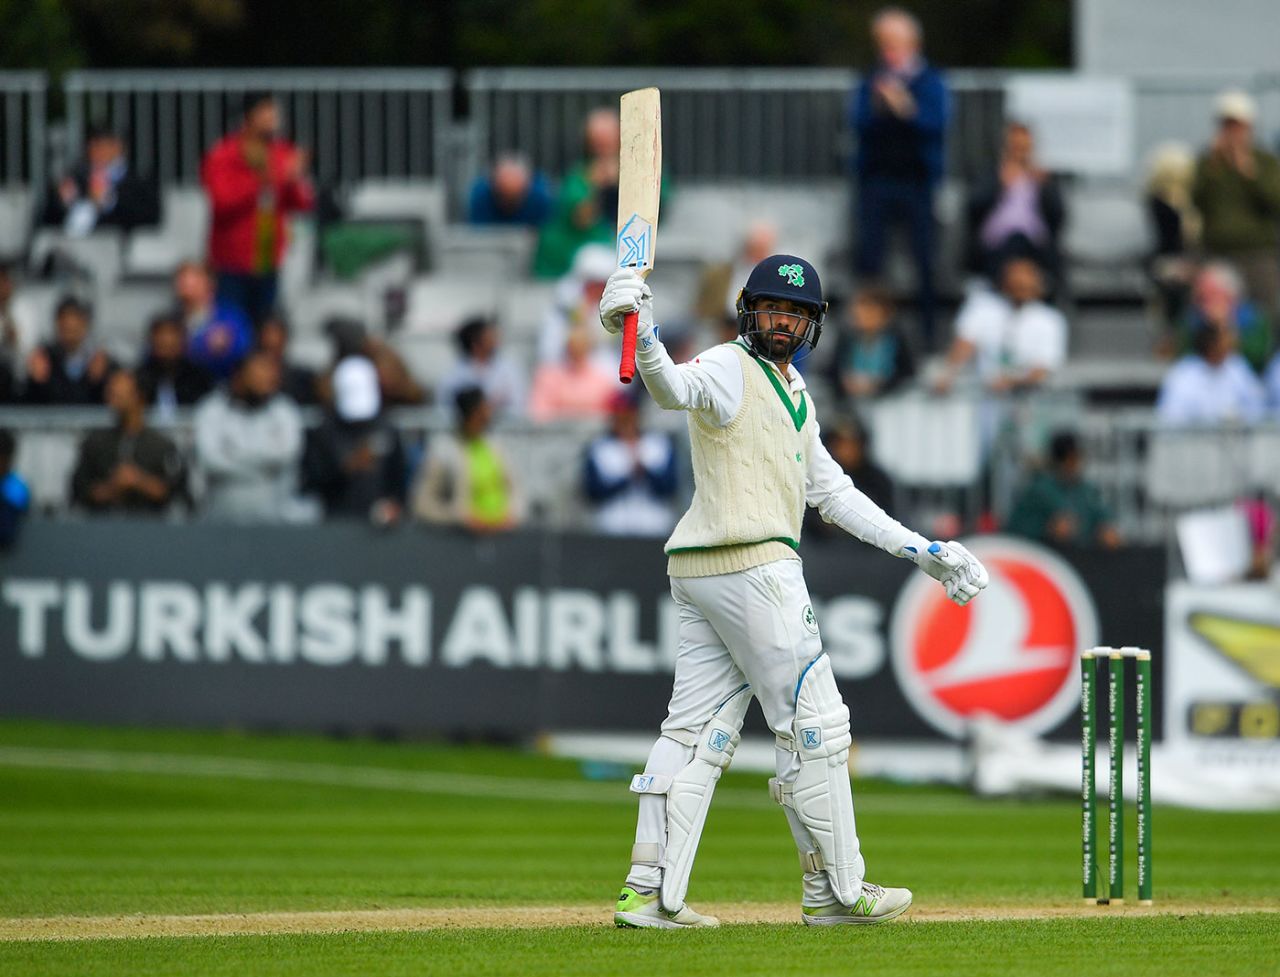 Stuart Thompson brings up his fifty, Ireland v Pakistan, Only Test, Malahide, 4th day, May 14, 2018